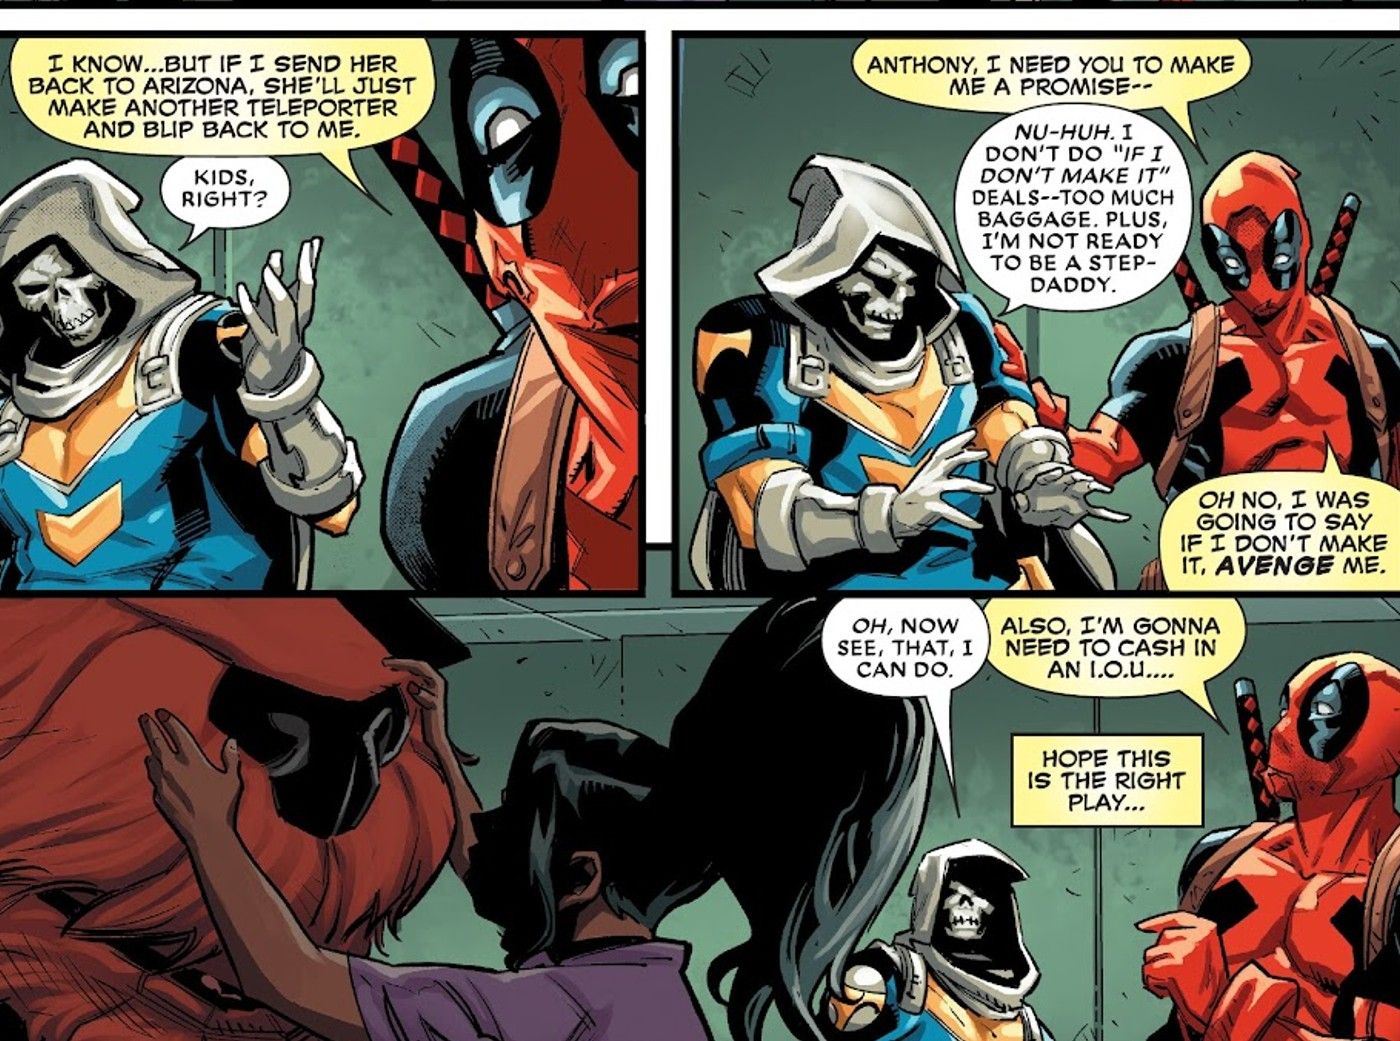 Deadpool and Taskmaster watches Ellie play with Princess, and Wade calls in an IOU to get Taskmaster to train his daughter.